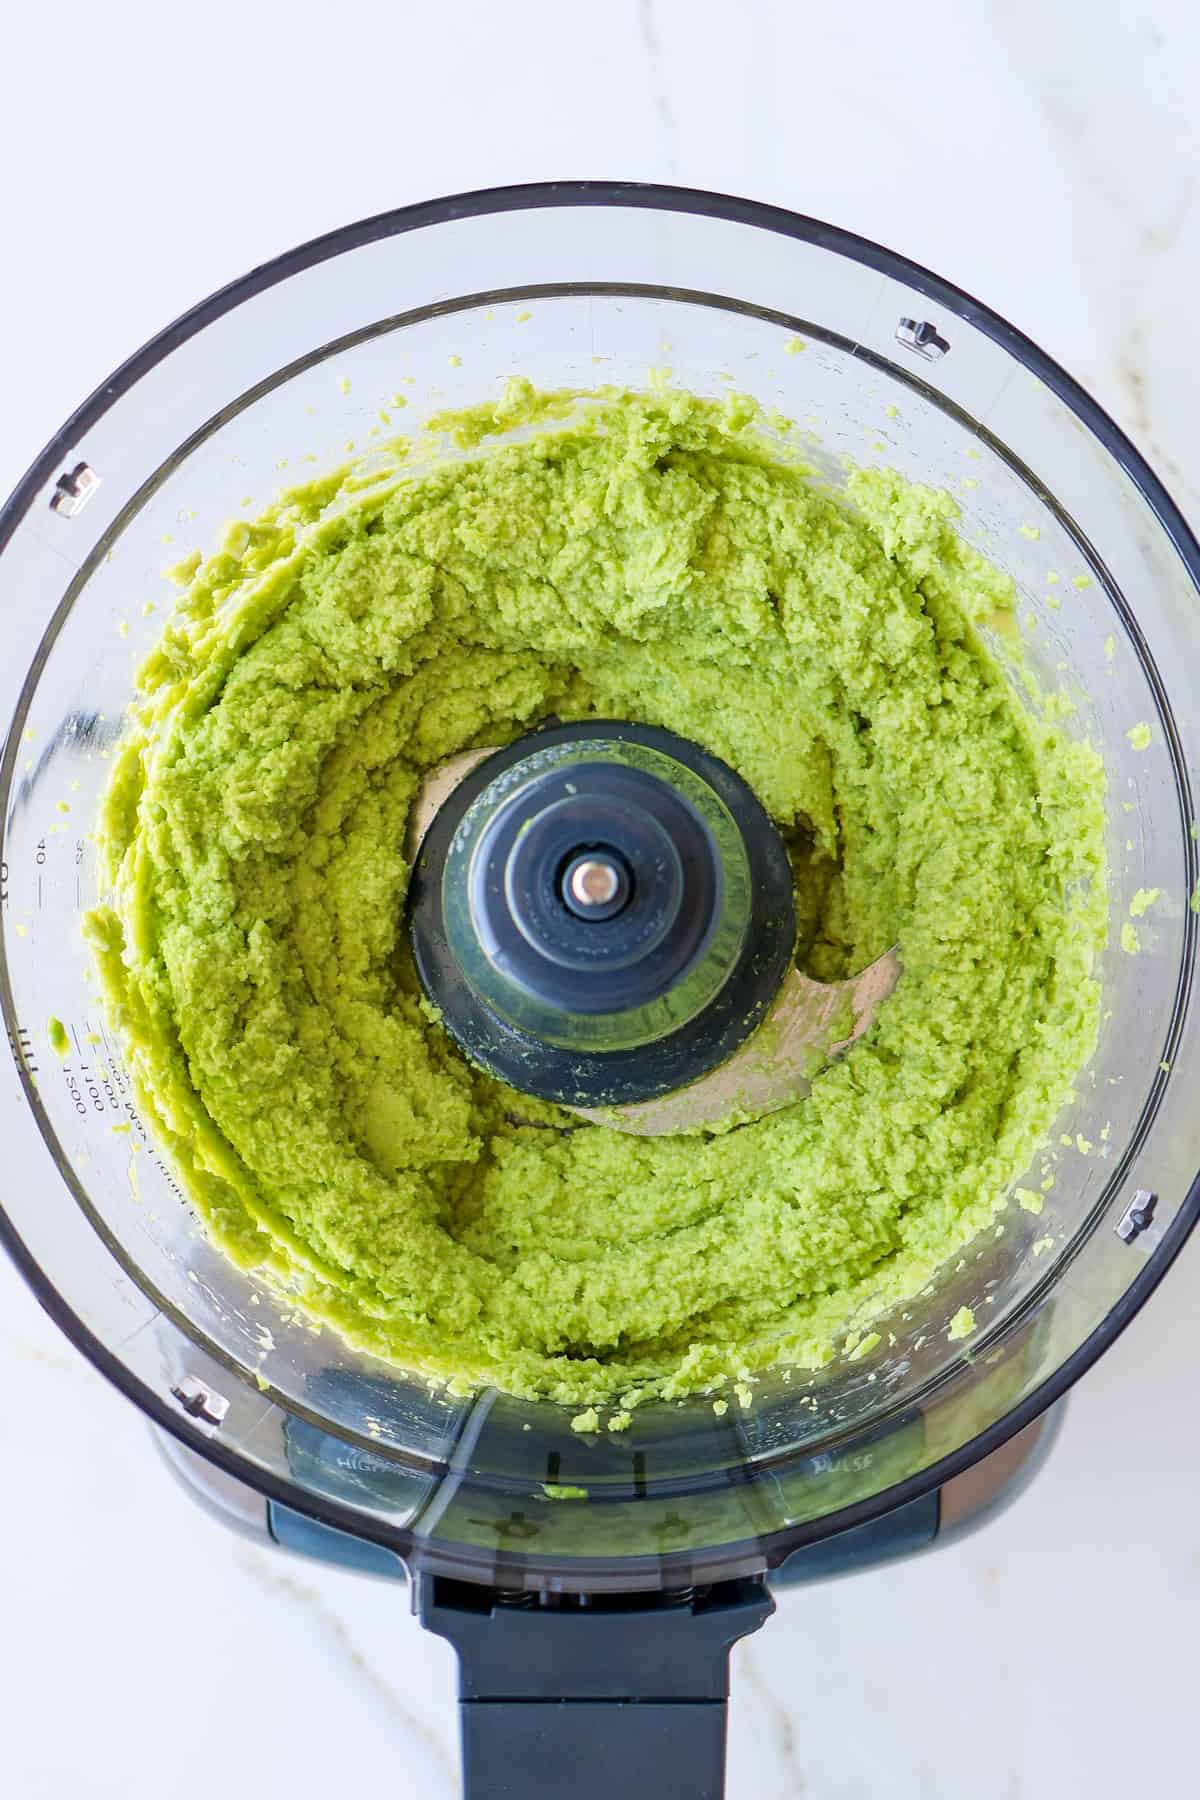 Blended edamame and avocado in a food processor.